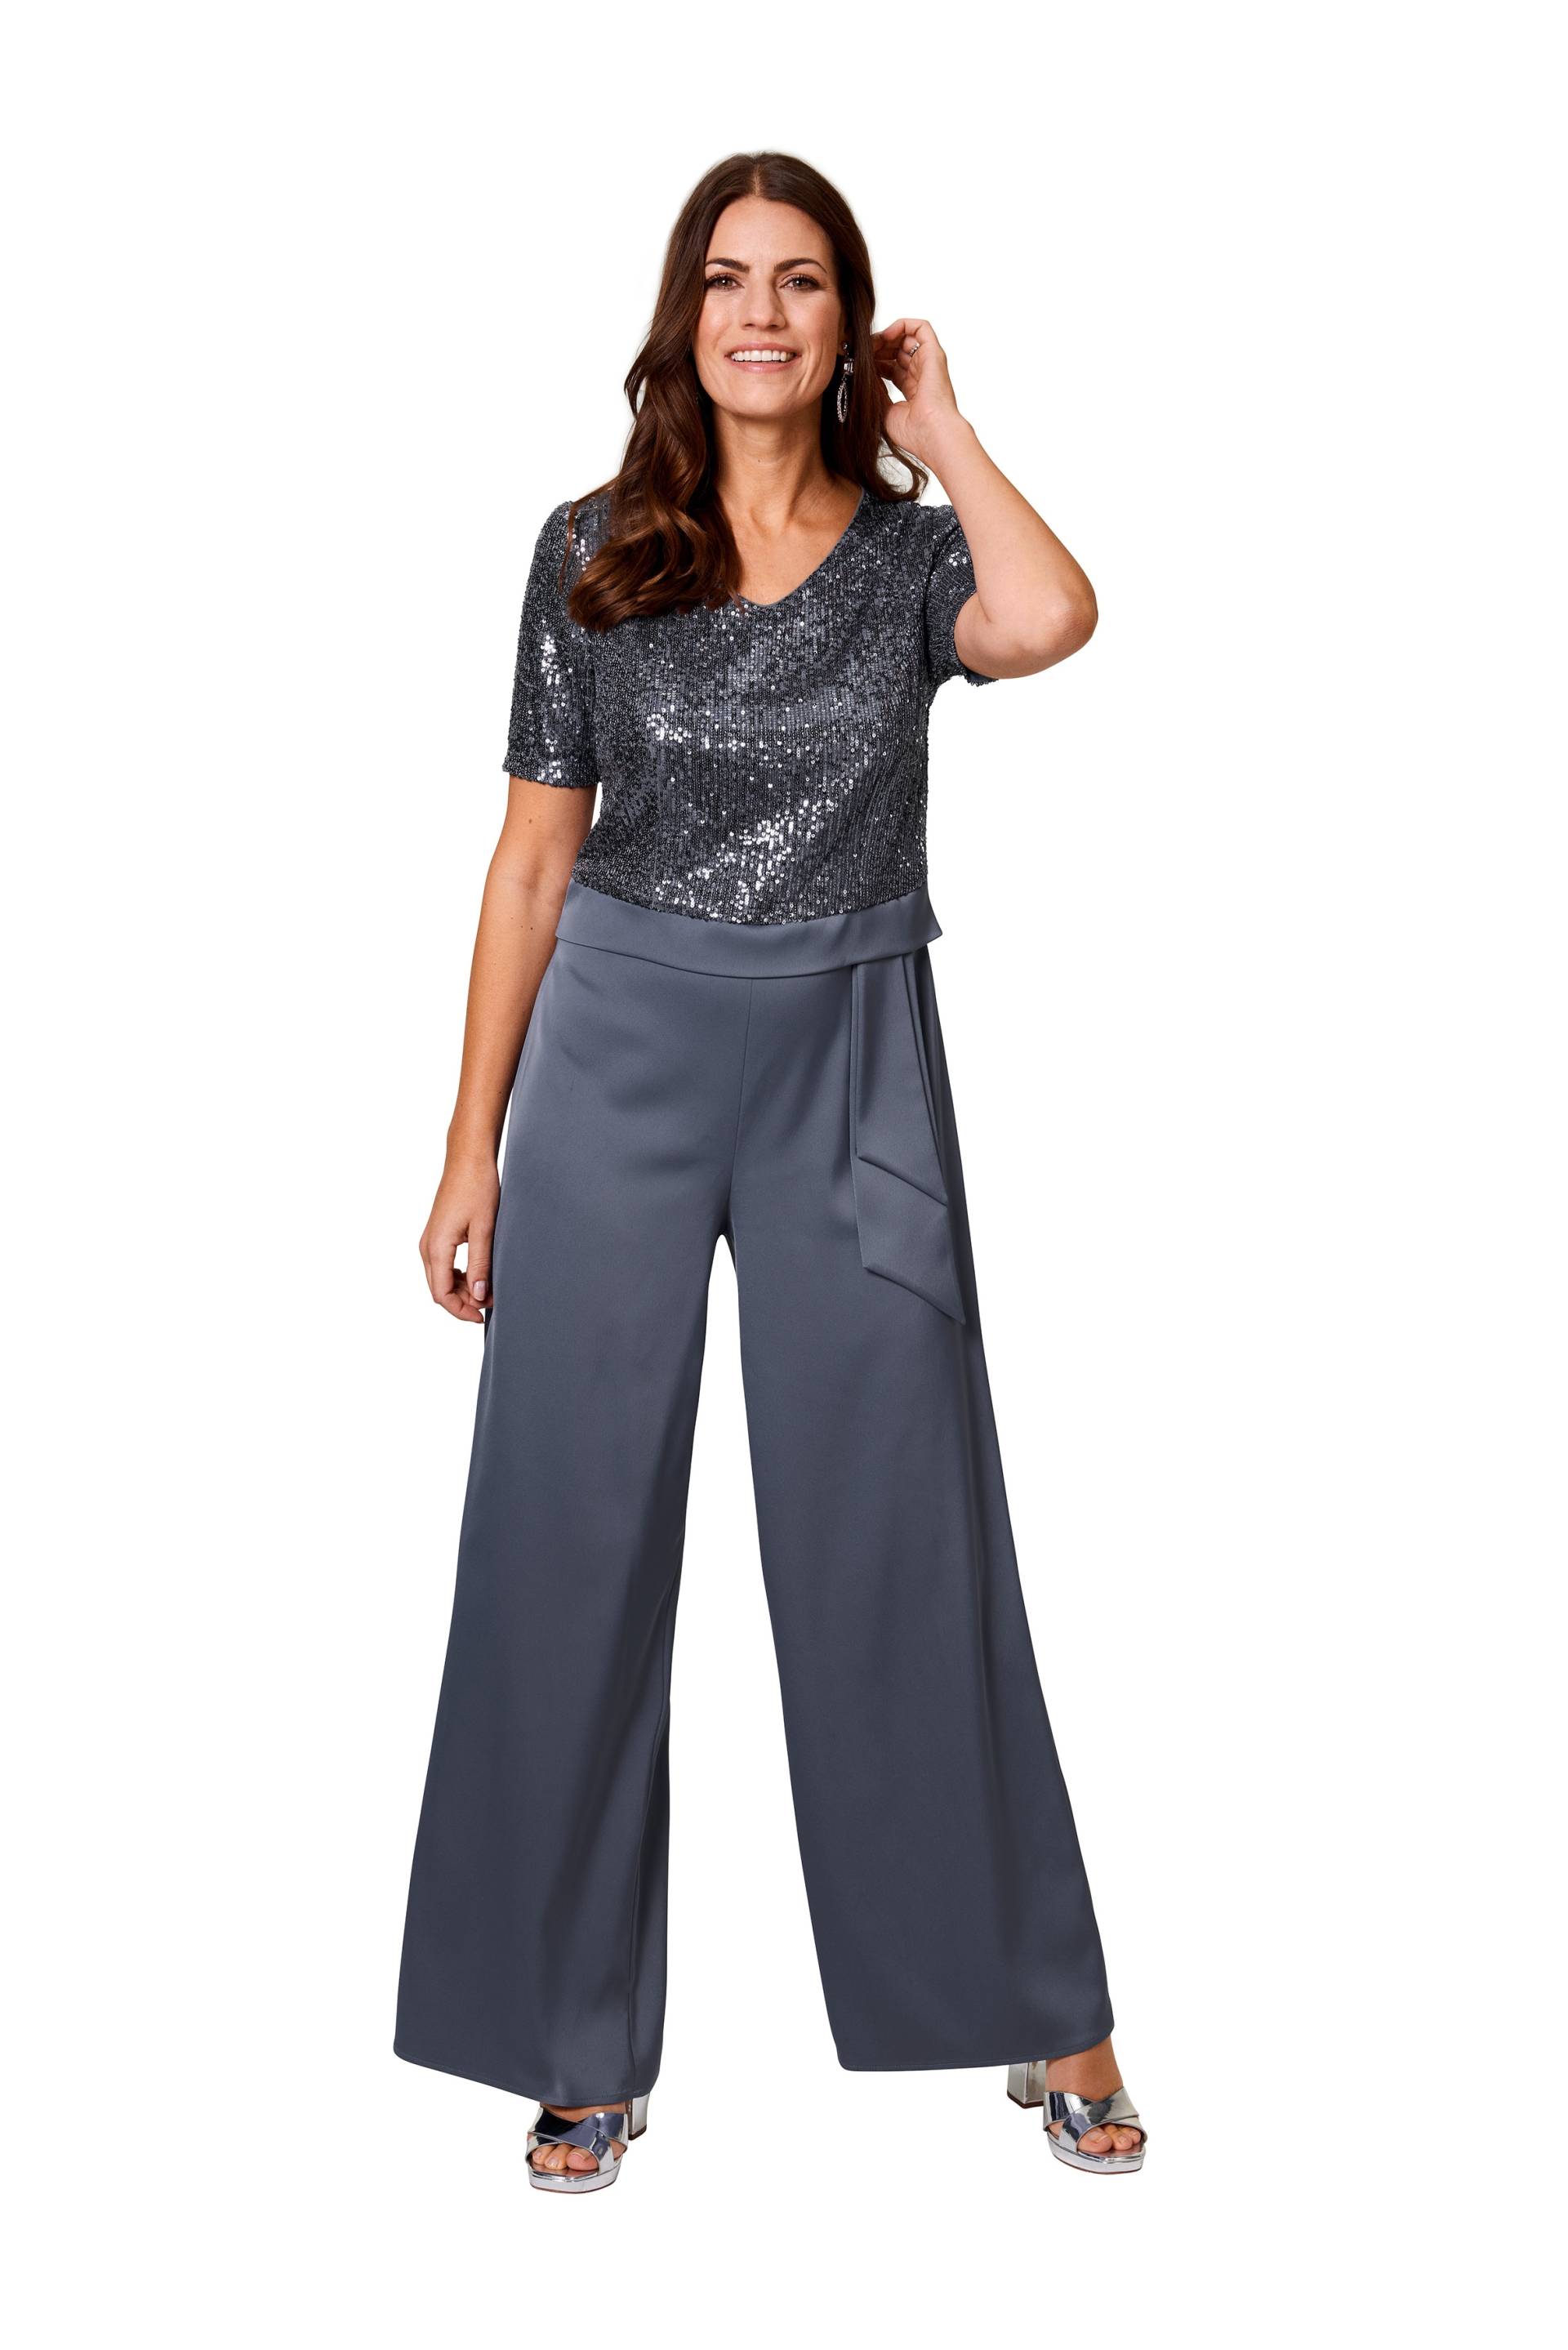 HERMANN LANGE Collection Culotte-Overall, mit Pailletten von Hermann Lange Collection